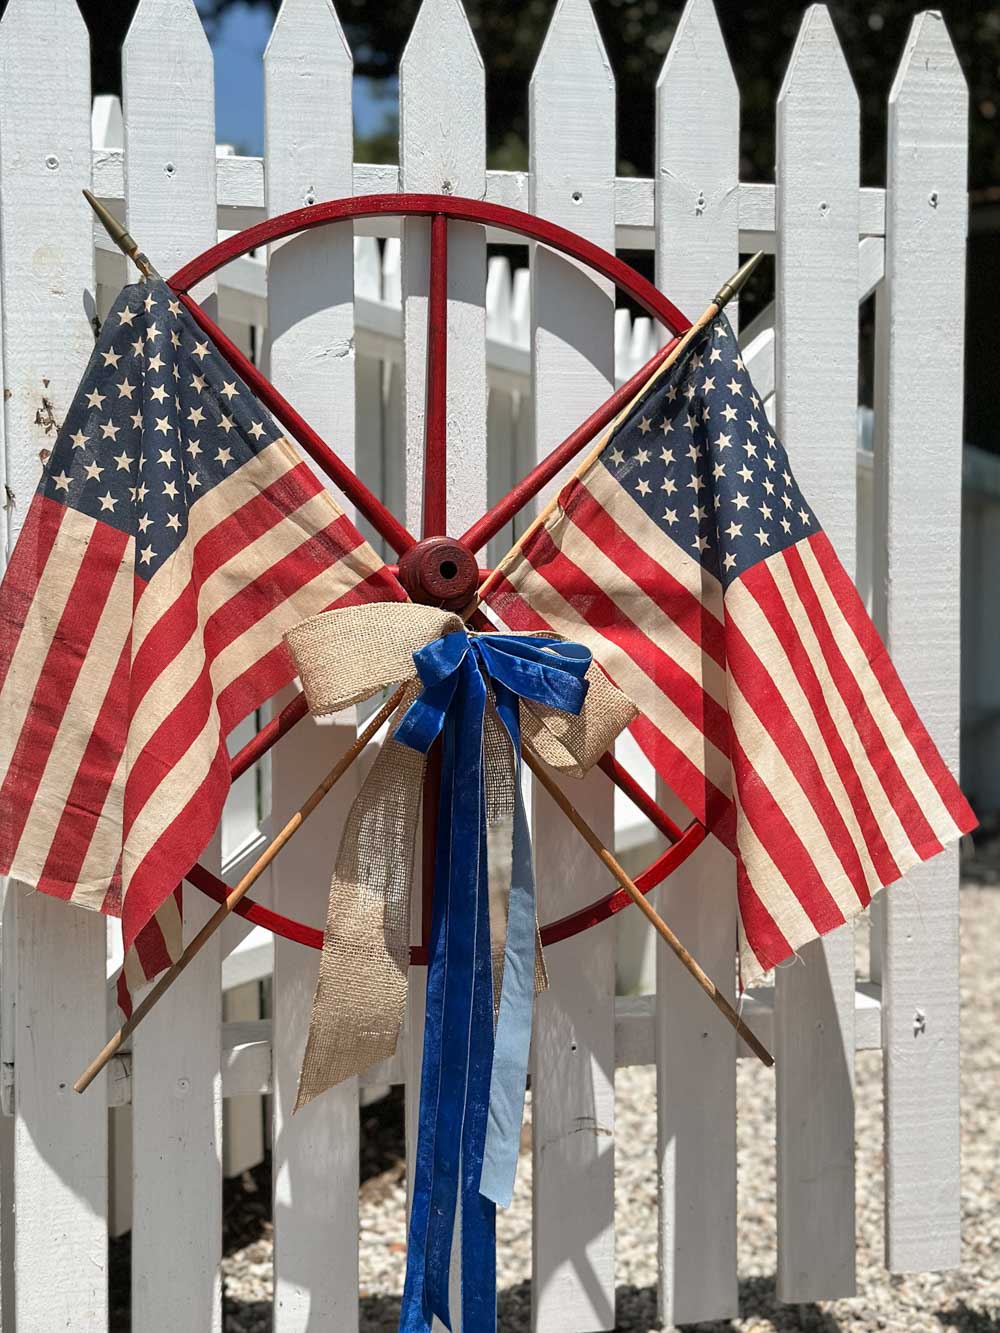 4th of July wagon wheel wreath hangin on a white picket fence gate